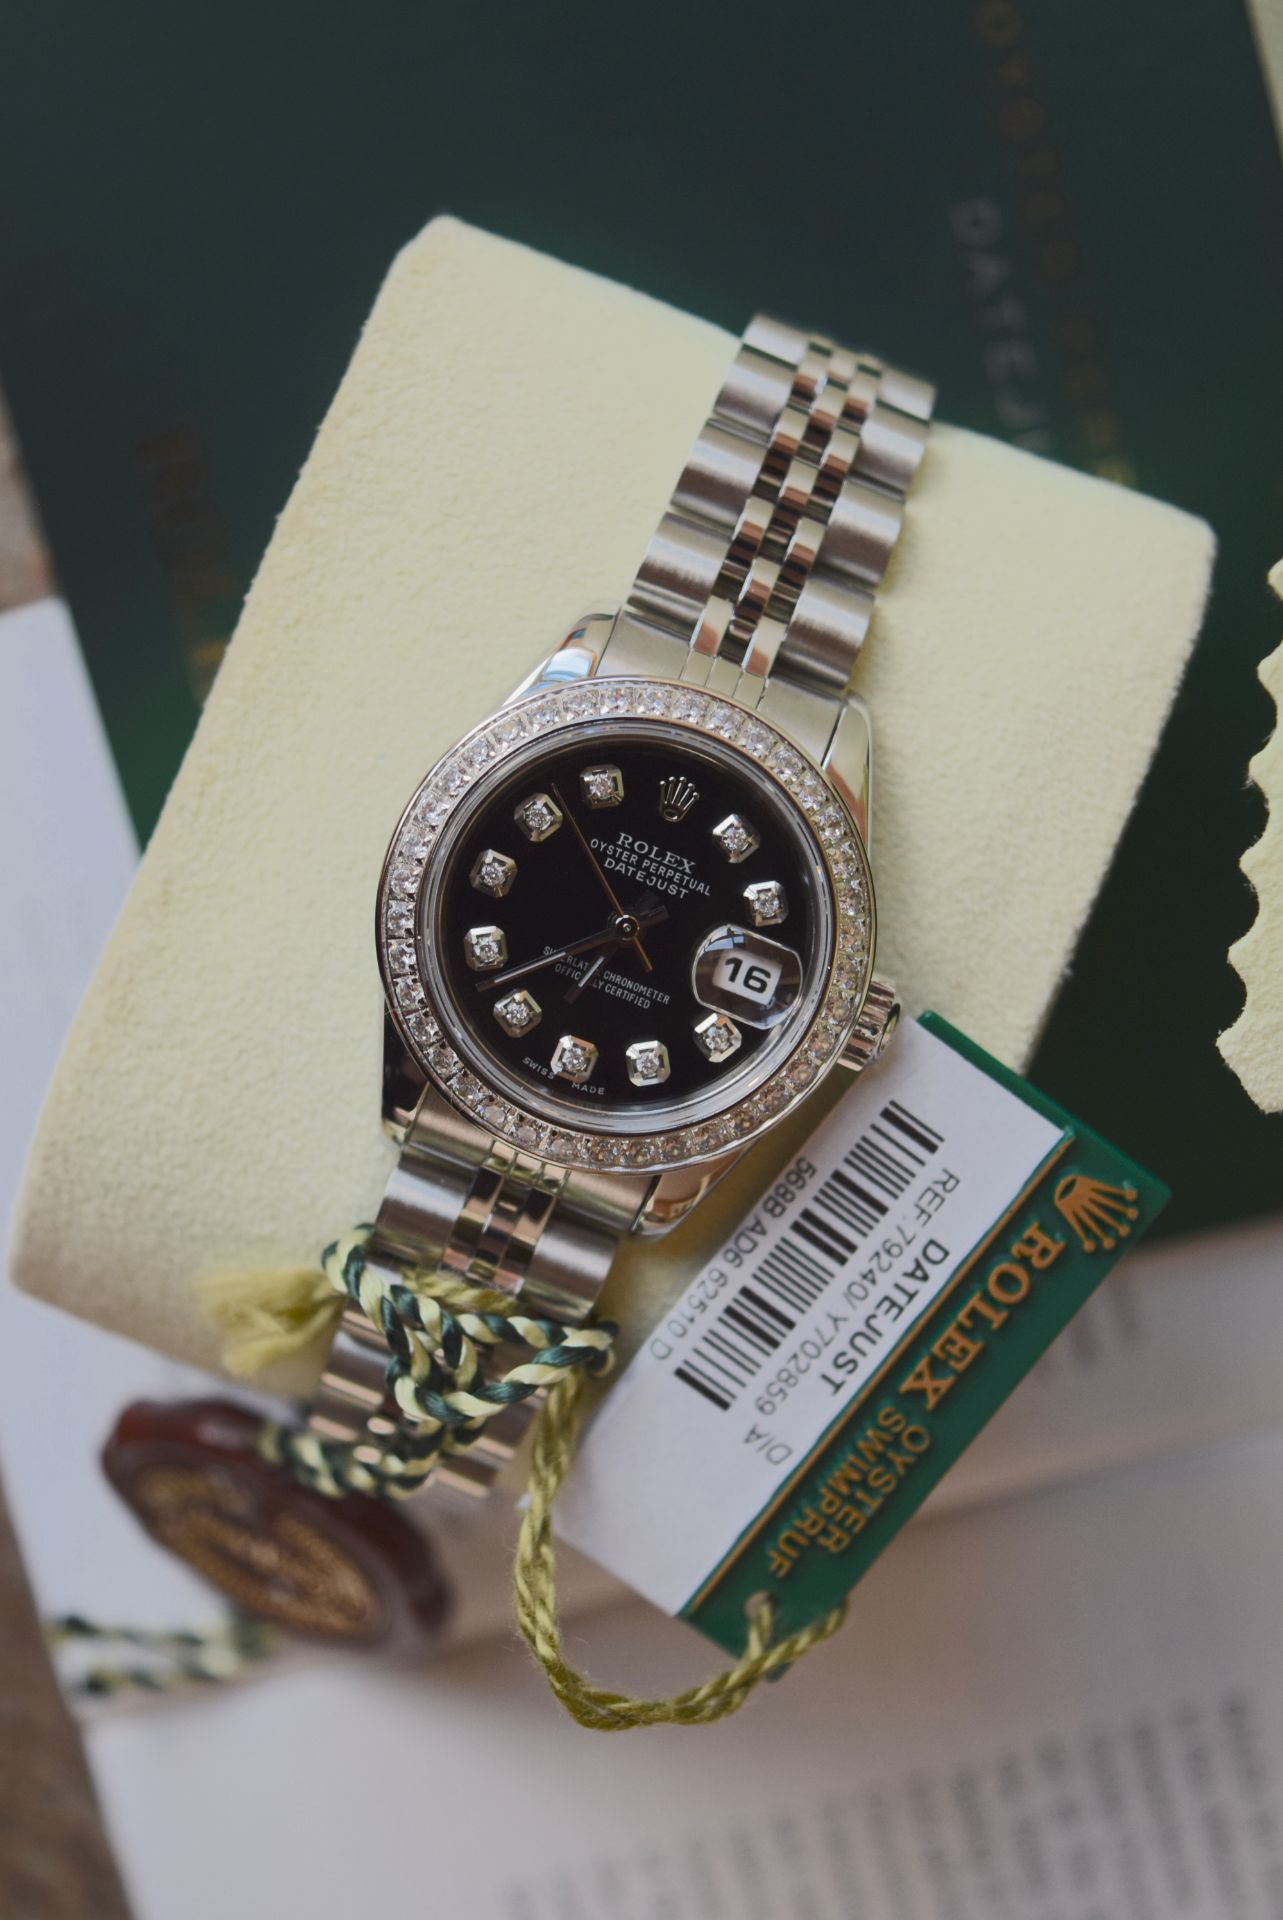 Rolex Datejust Stainless Steel - Black Diamond-set Dial - Image 9 of 9